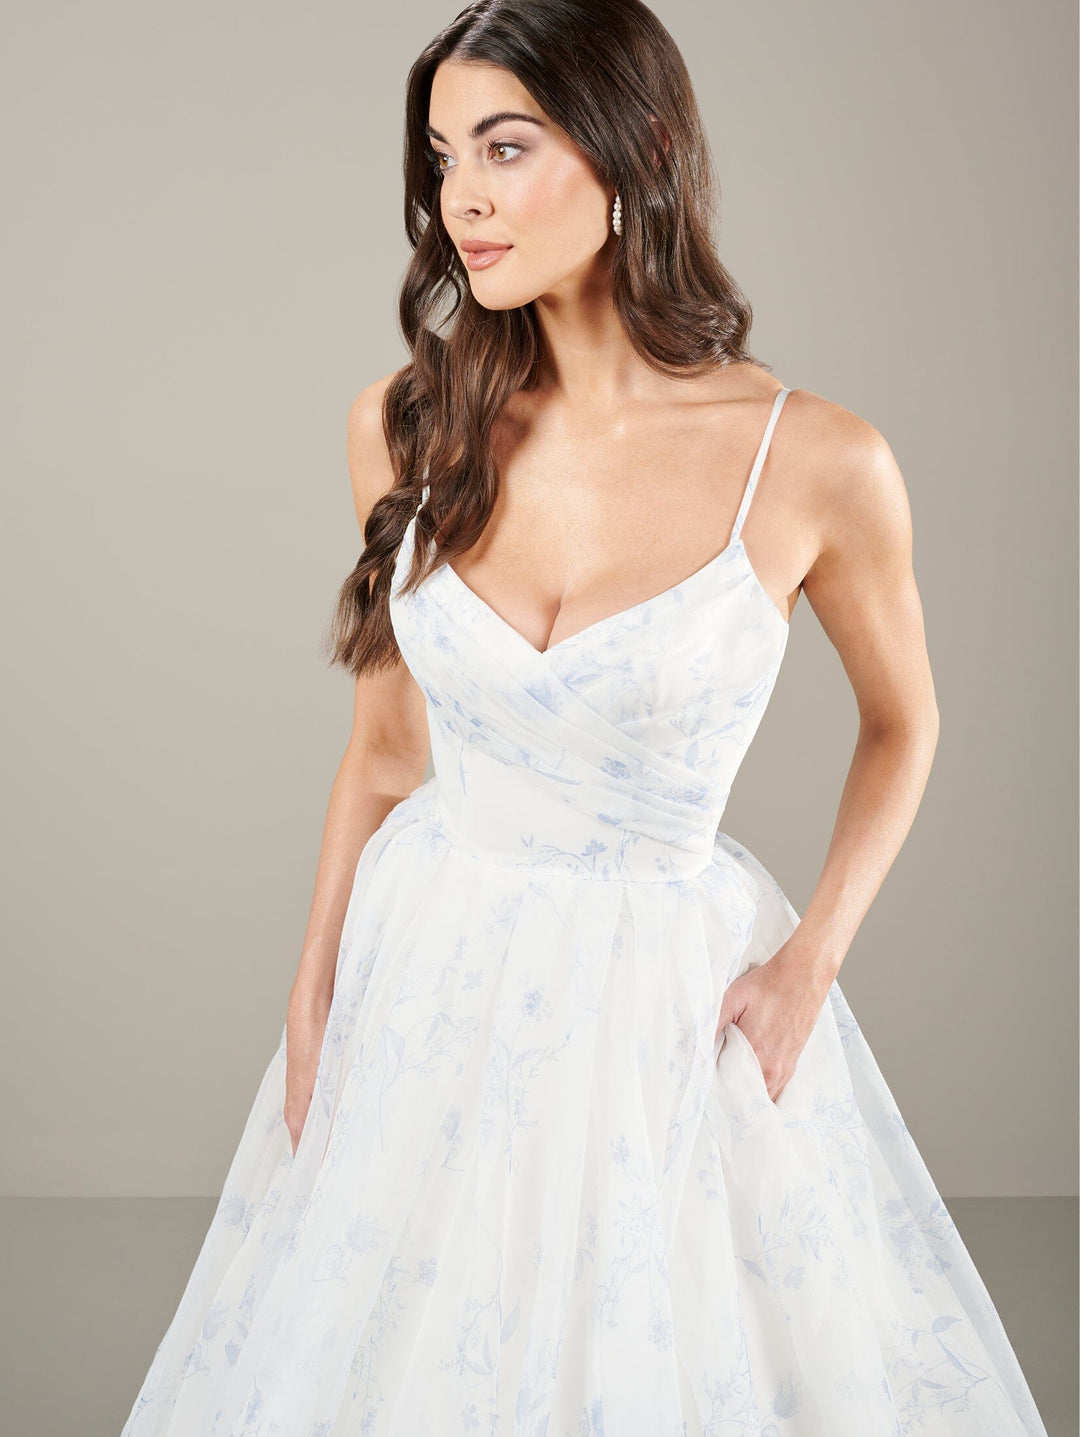 Sleeveless Organza Bridal Gown by Adrianna Papell 31271